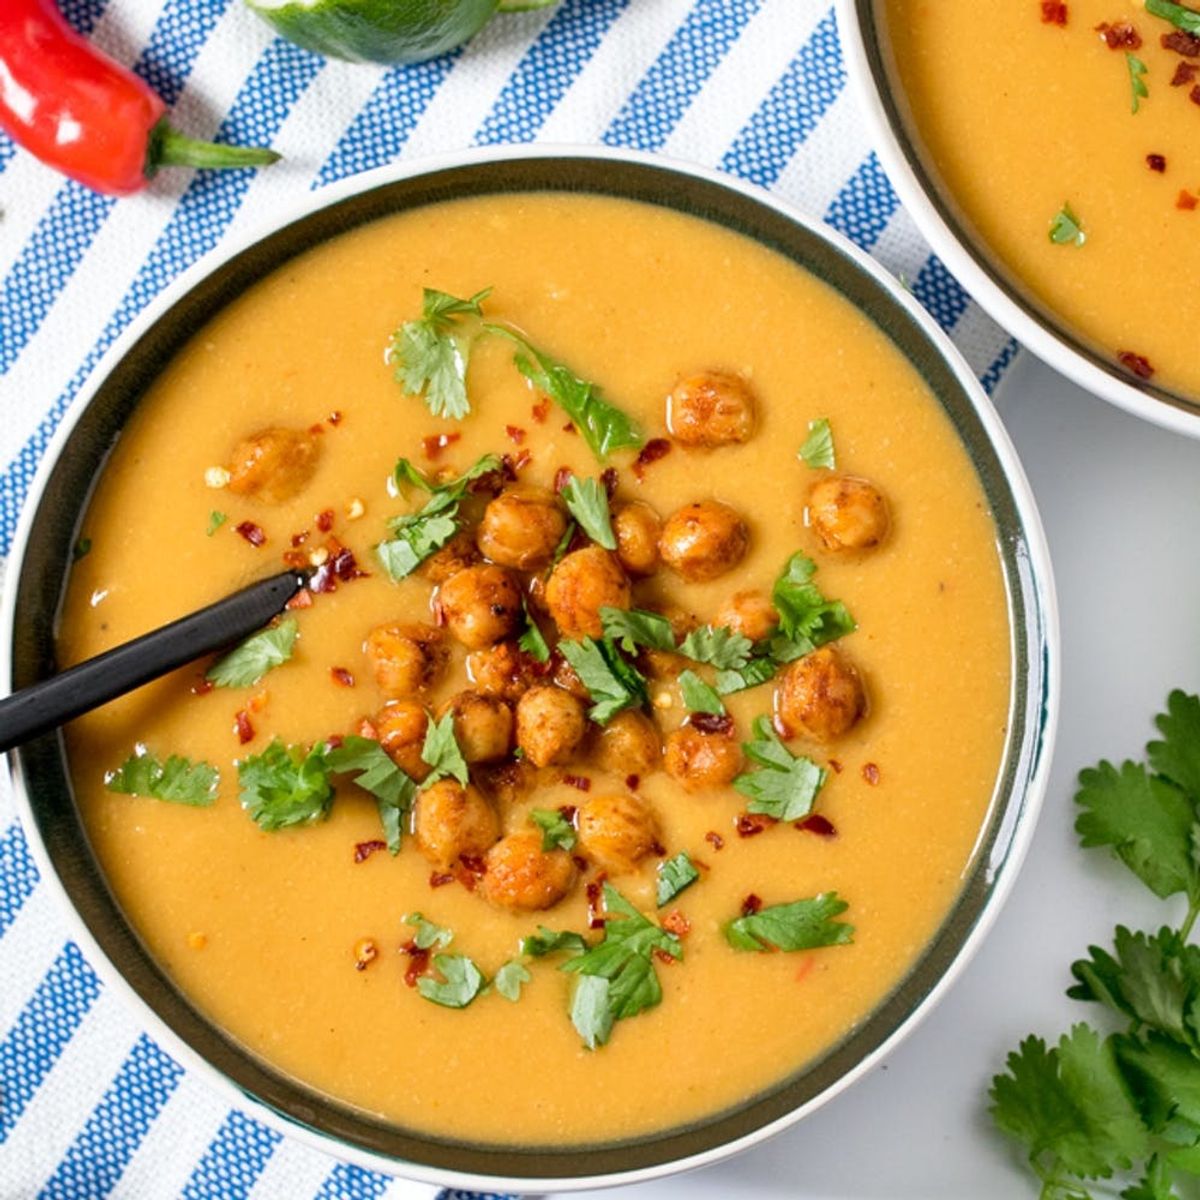 Batch Cook This Chickpea and Lime Soup for Lunches All Week